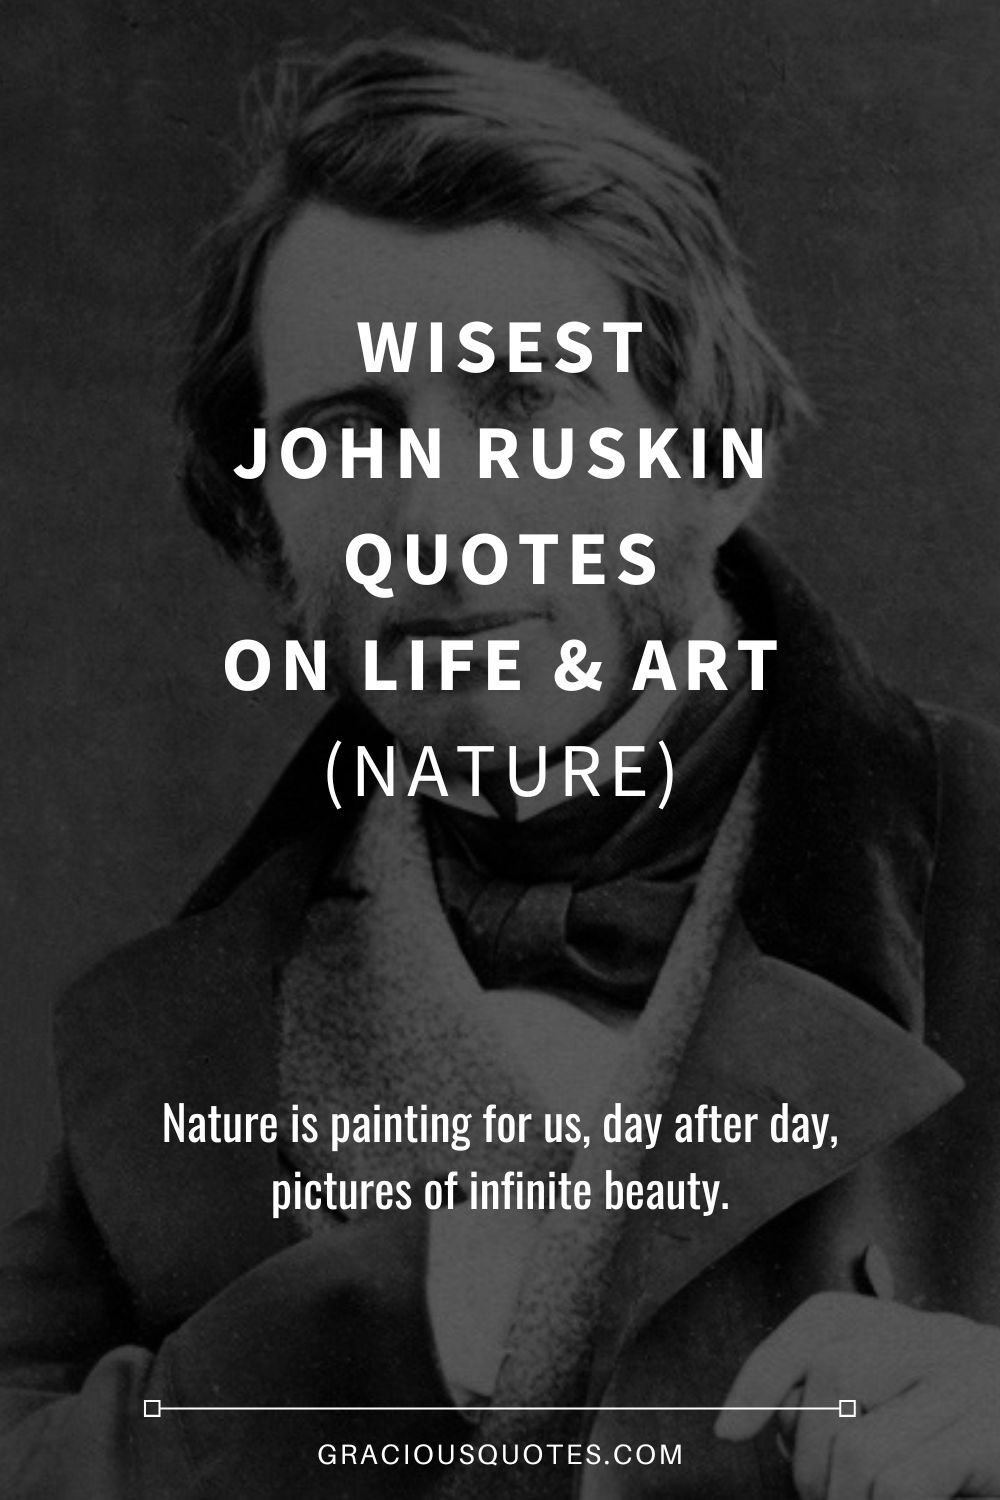 Wisest John Ruskin Quotes on Life & Art (NATURE) - Gracious Quotes